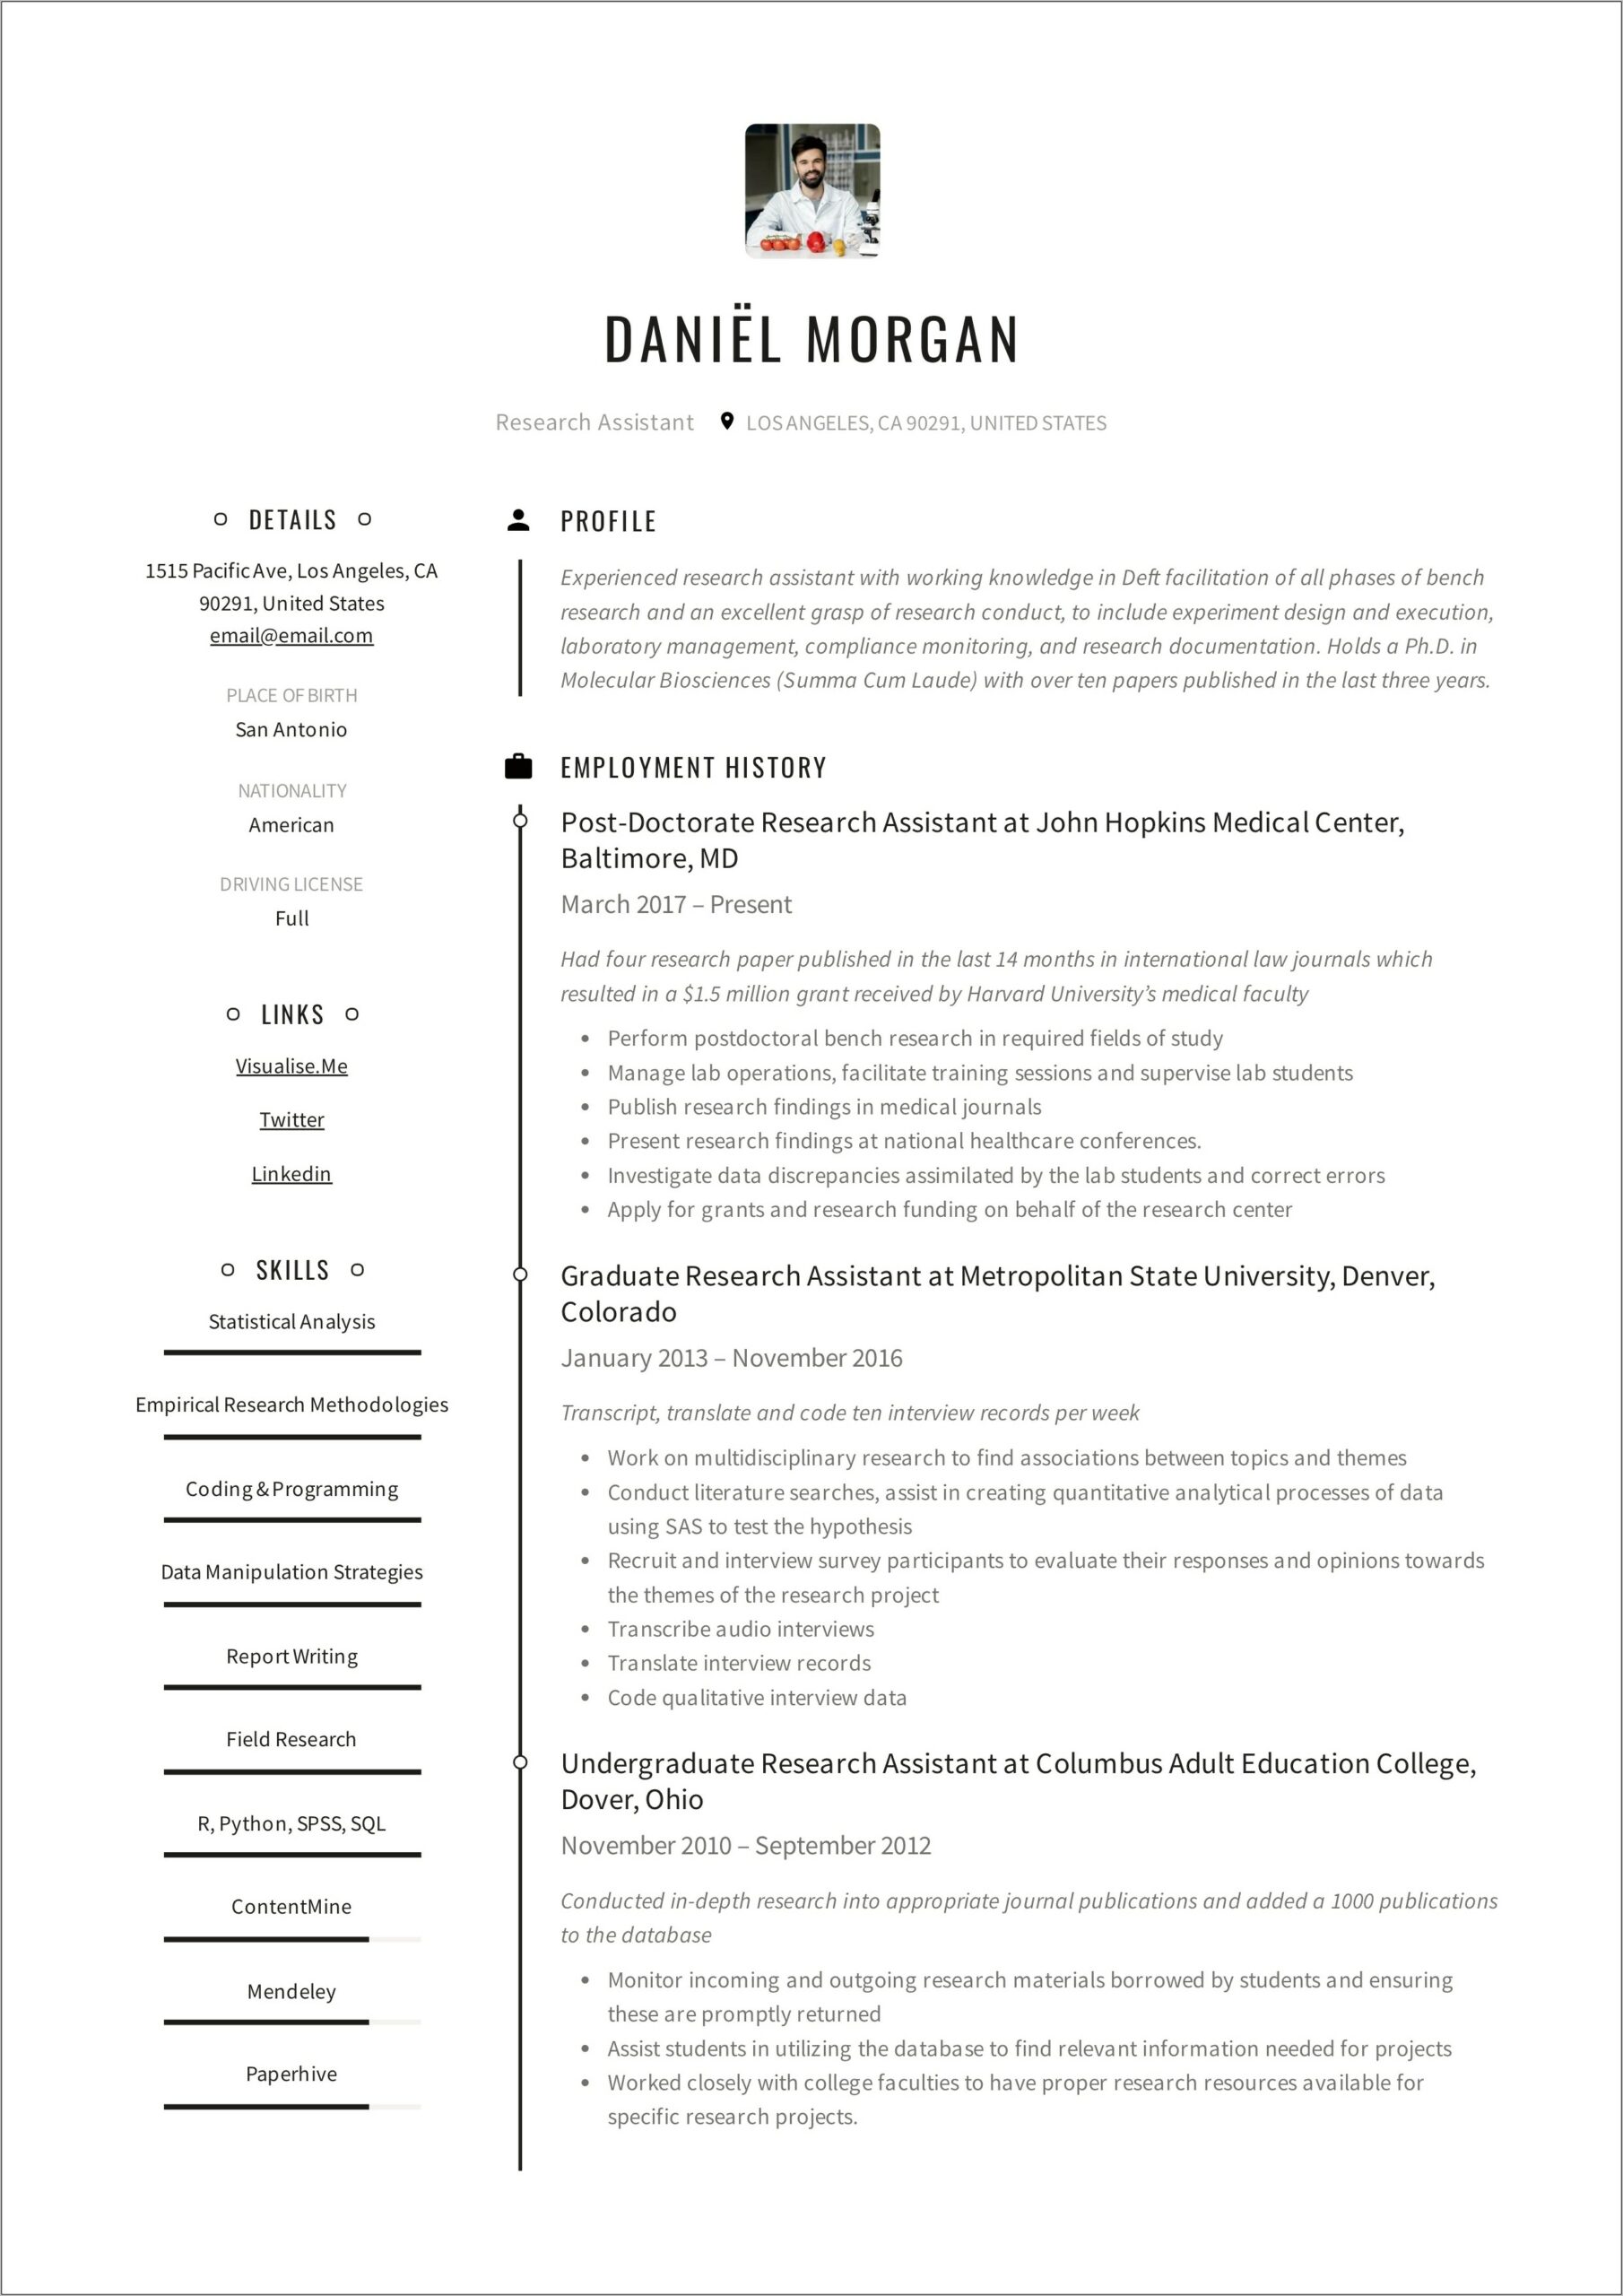 Public Health Research Assistant Resume Sample